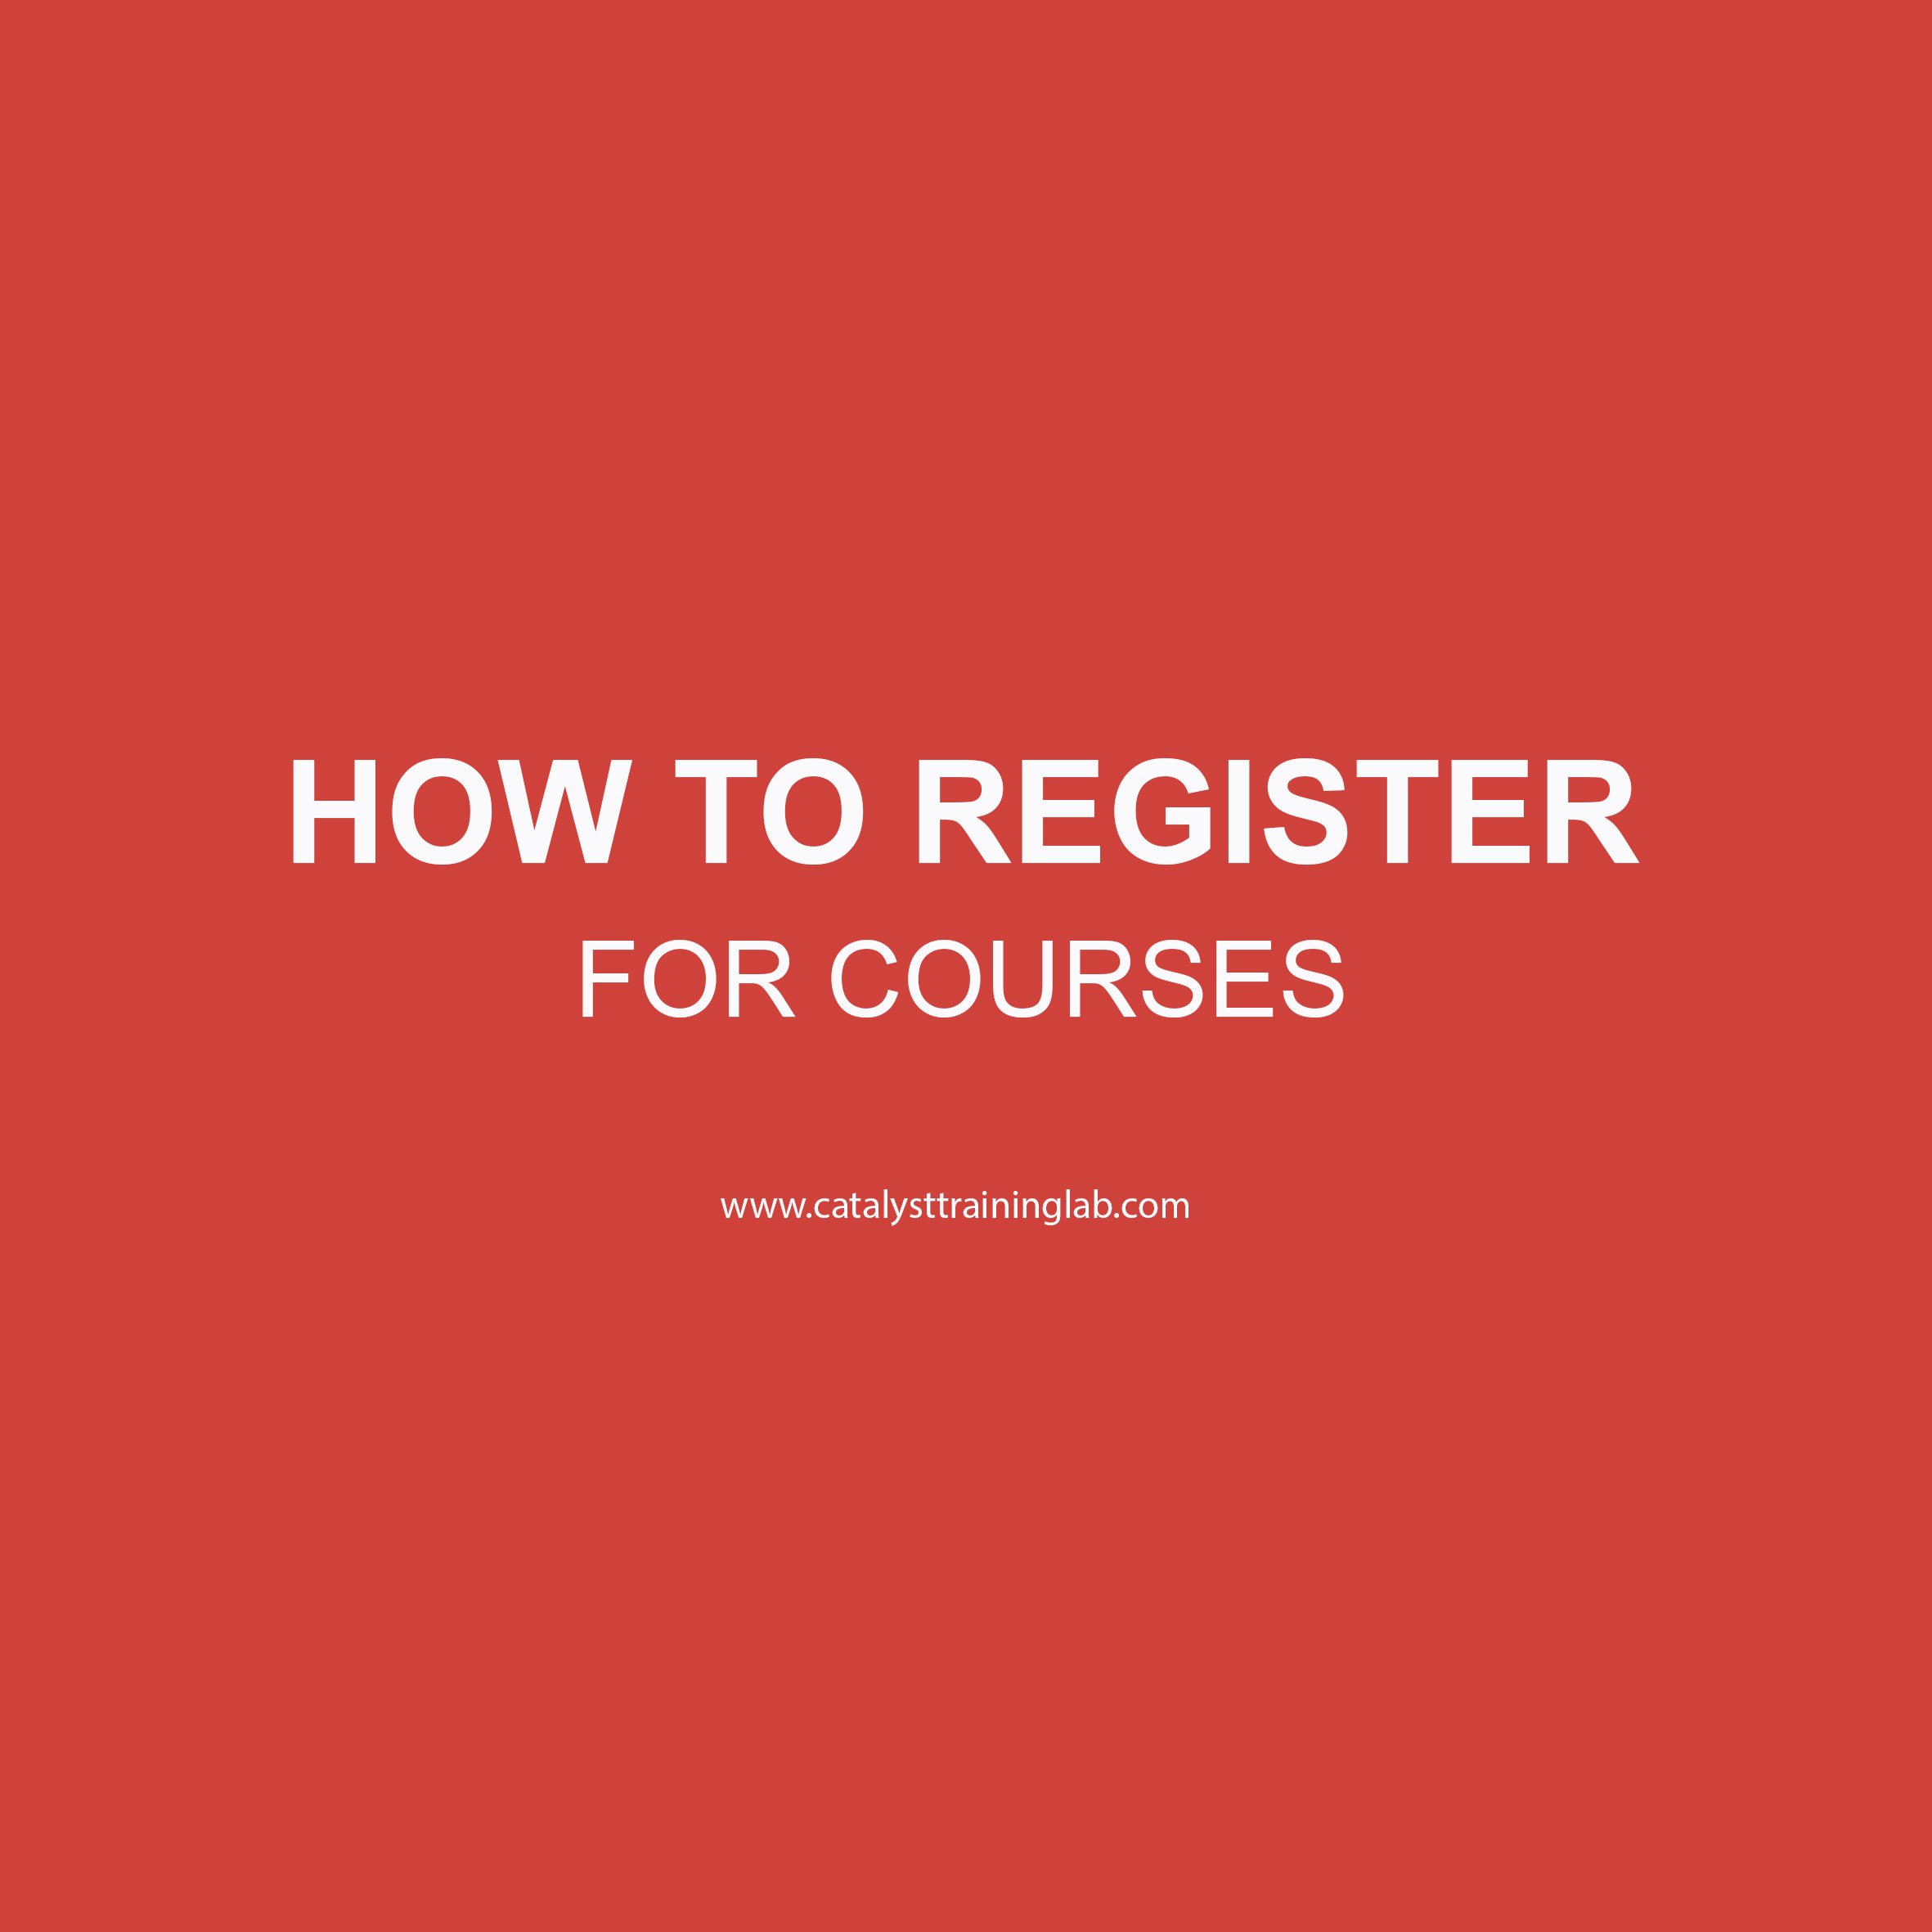 HOW TO REGISTER IN COURSES 